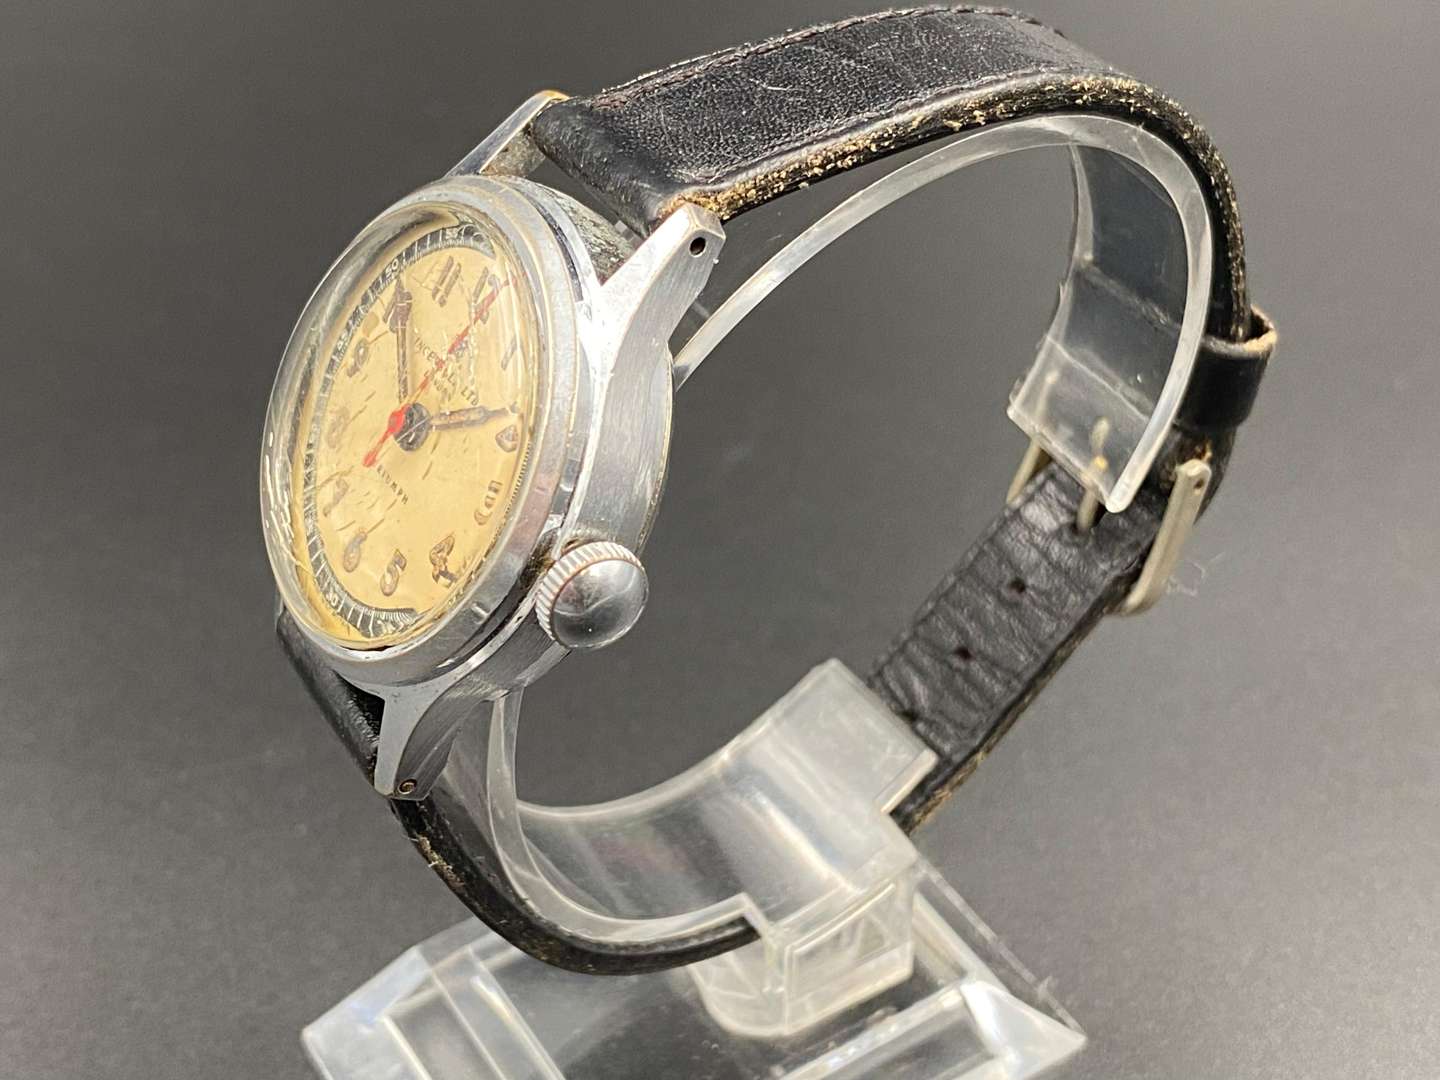 <p>INGERSOL LTD- LONDON, “Triumph”, a 1950's chrome plated and stainless steel, centre seconds wristwatch</p>